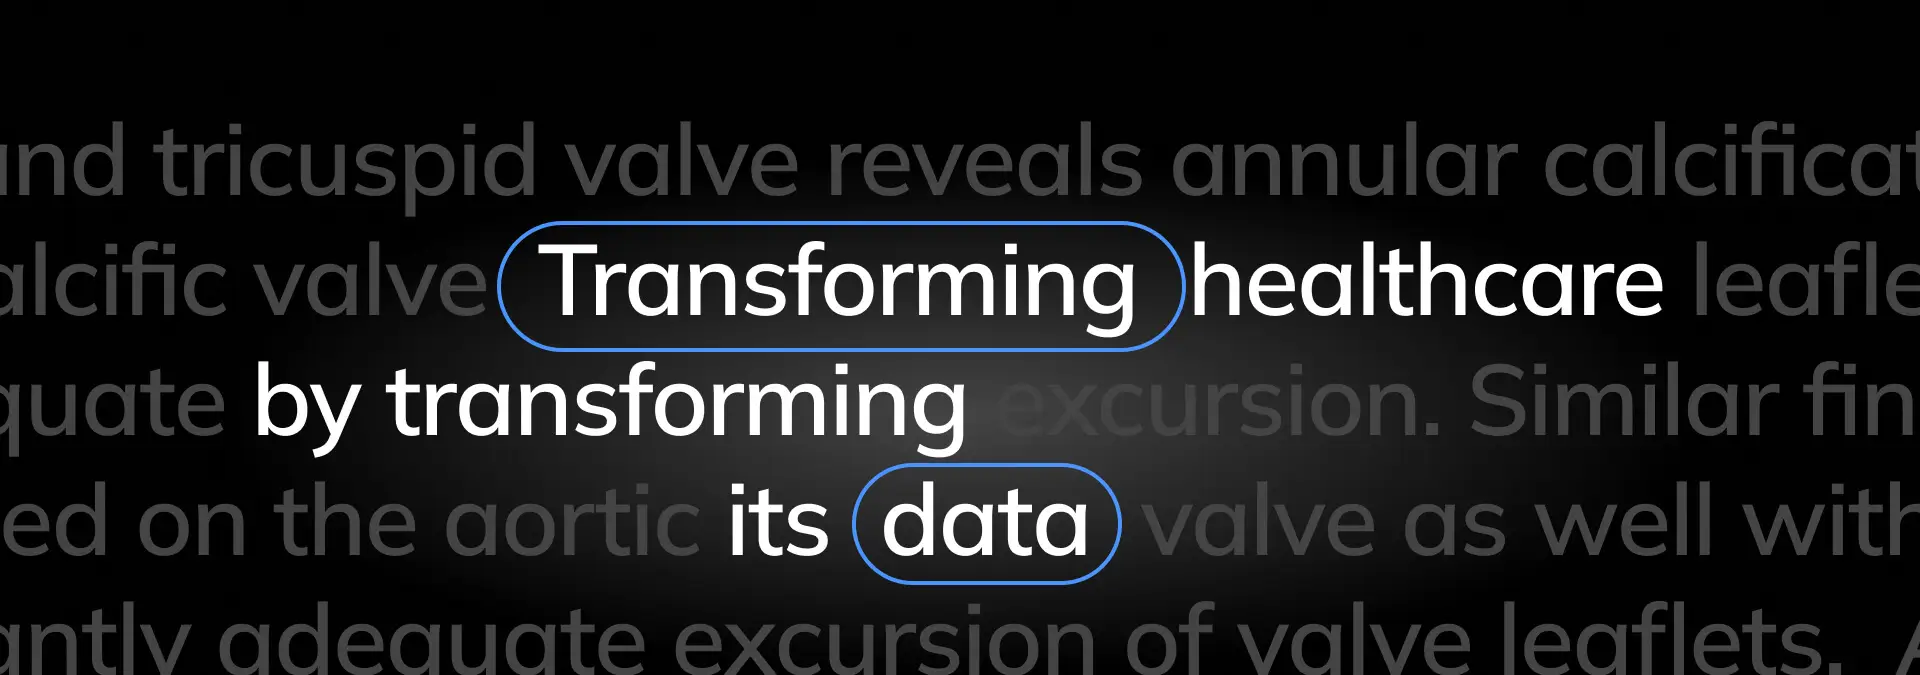 transforming healthcare by transforming its data